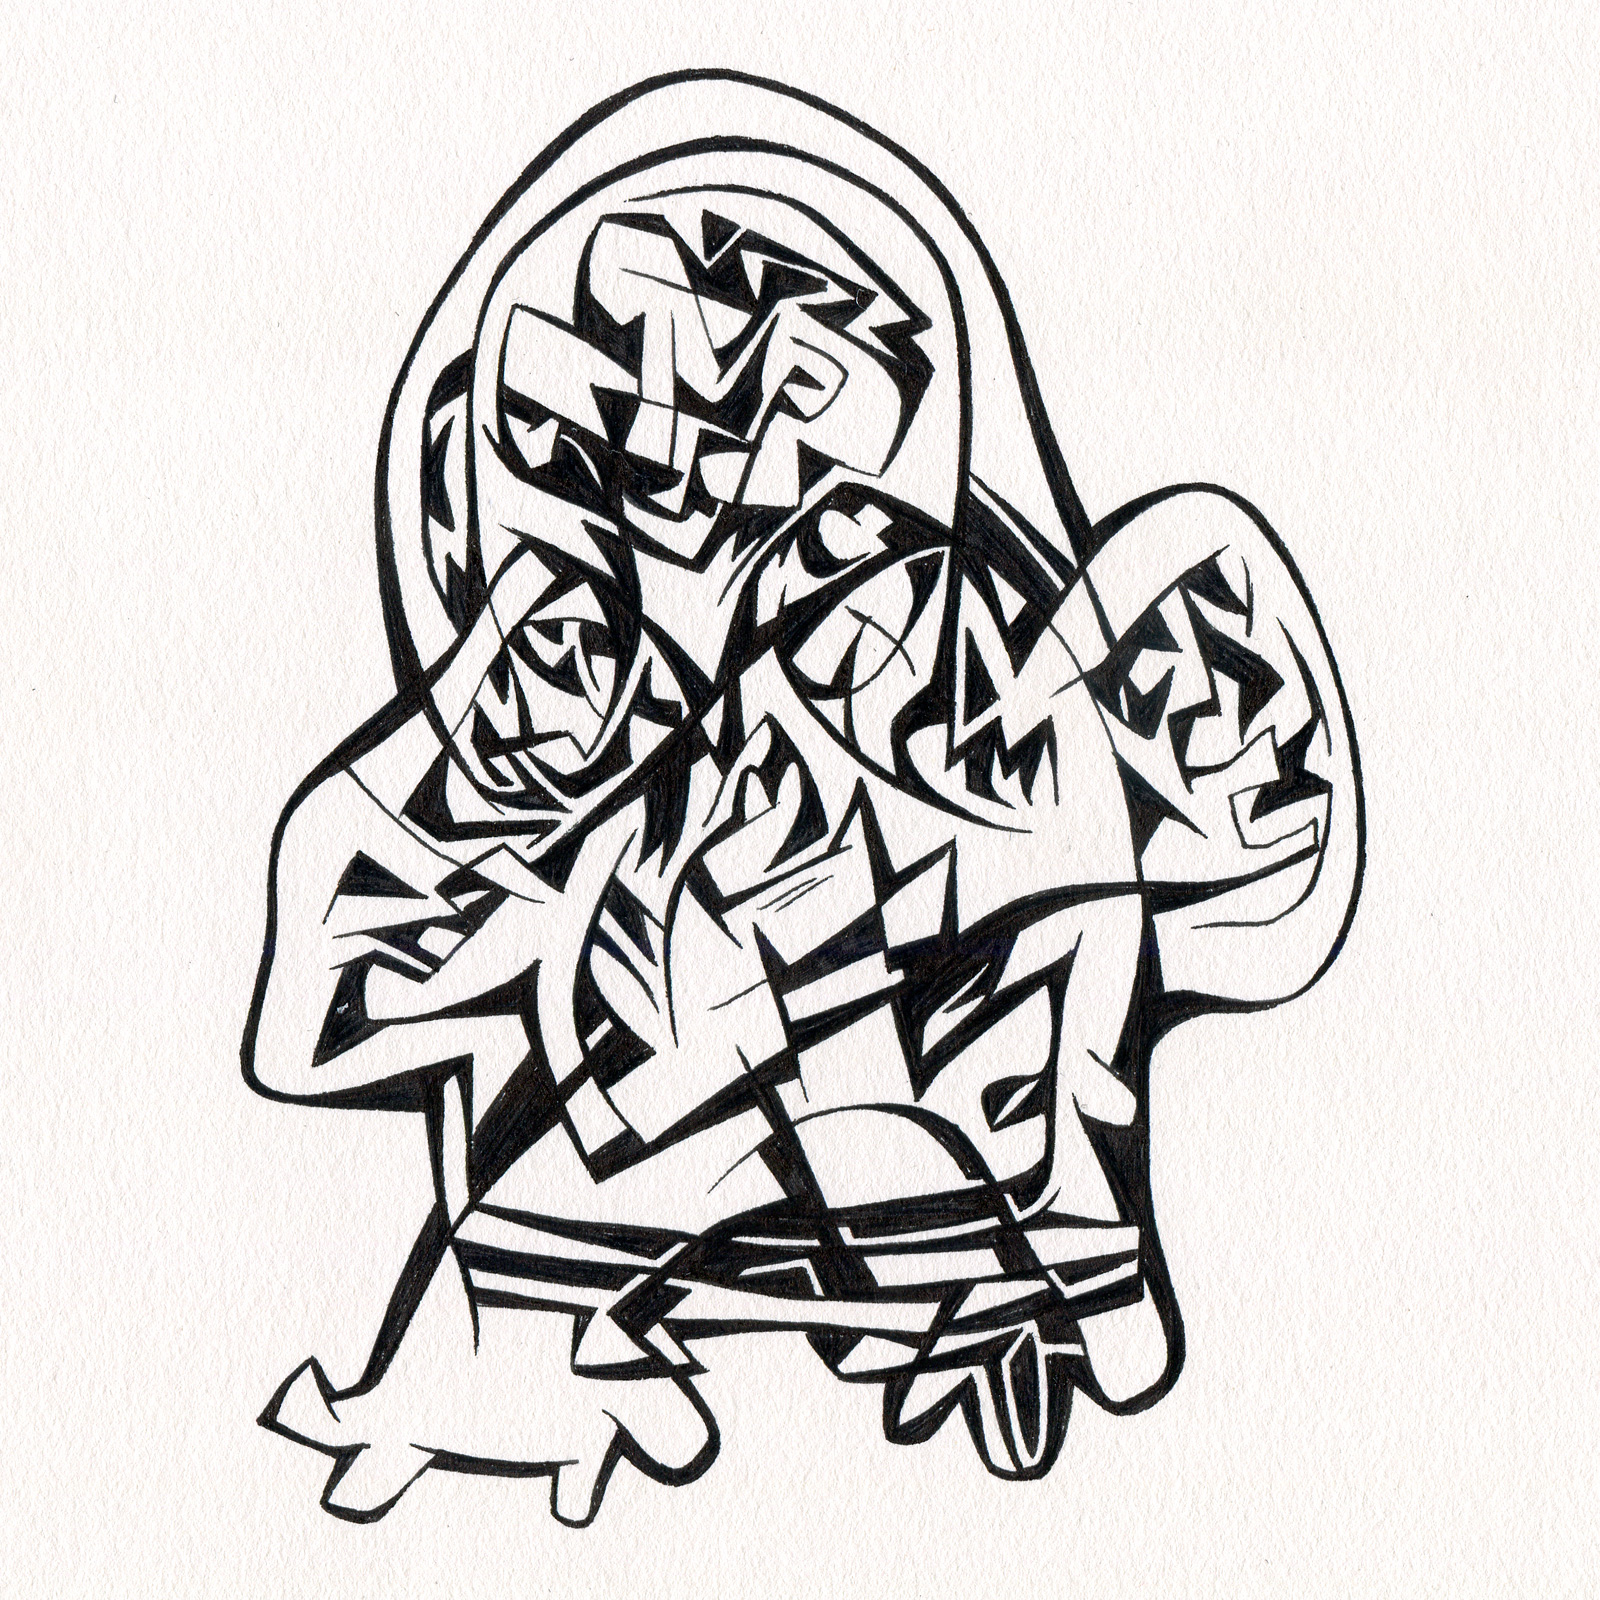   Untitled Ink Drawing #104 , 2015. Ink on paper. Approximately 5" x 5". 